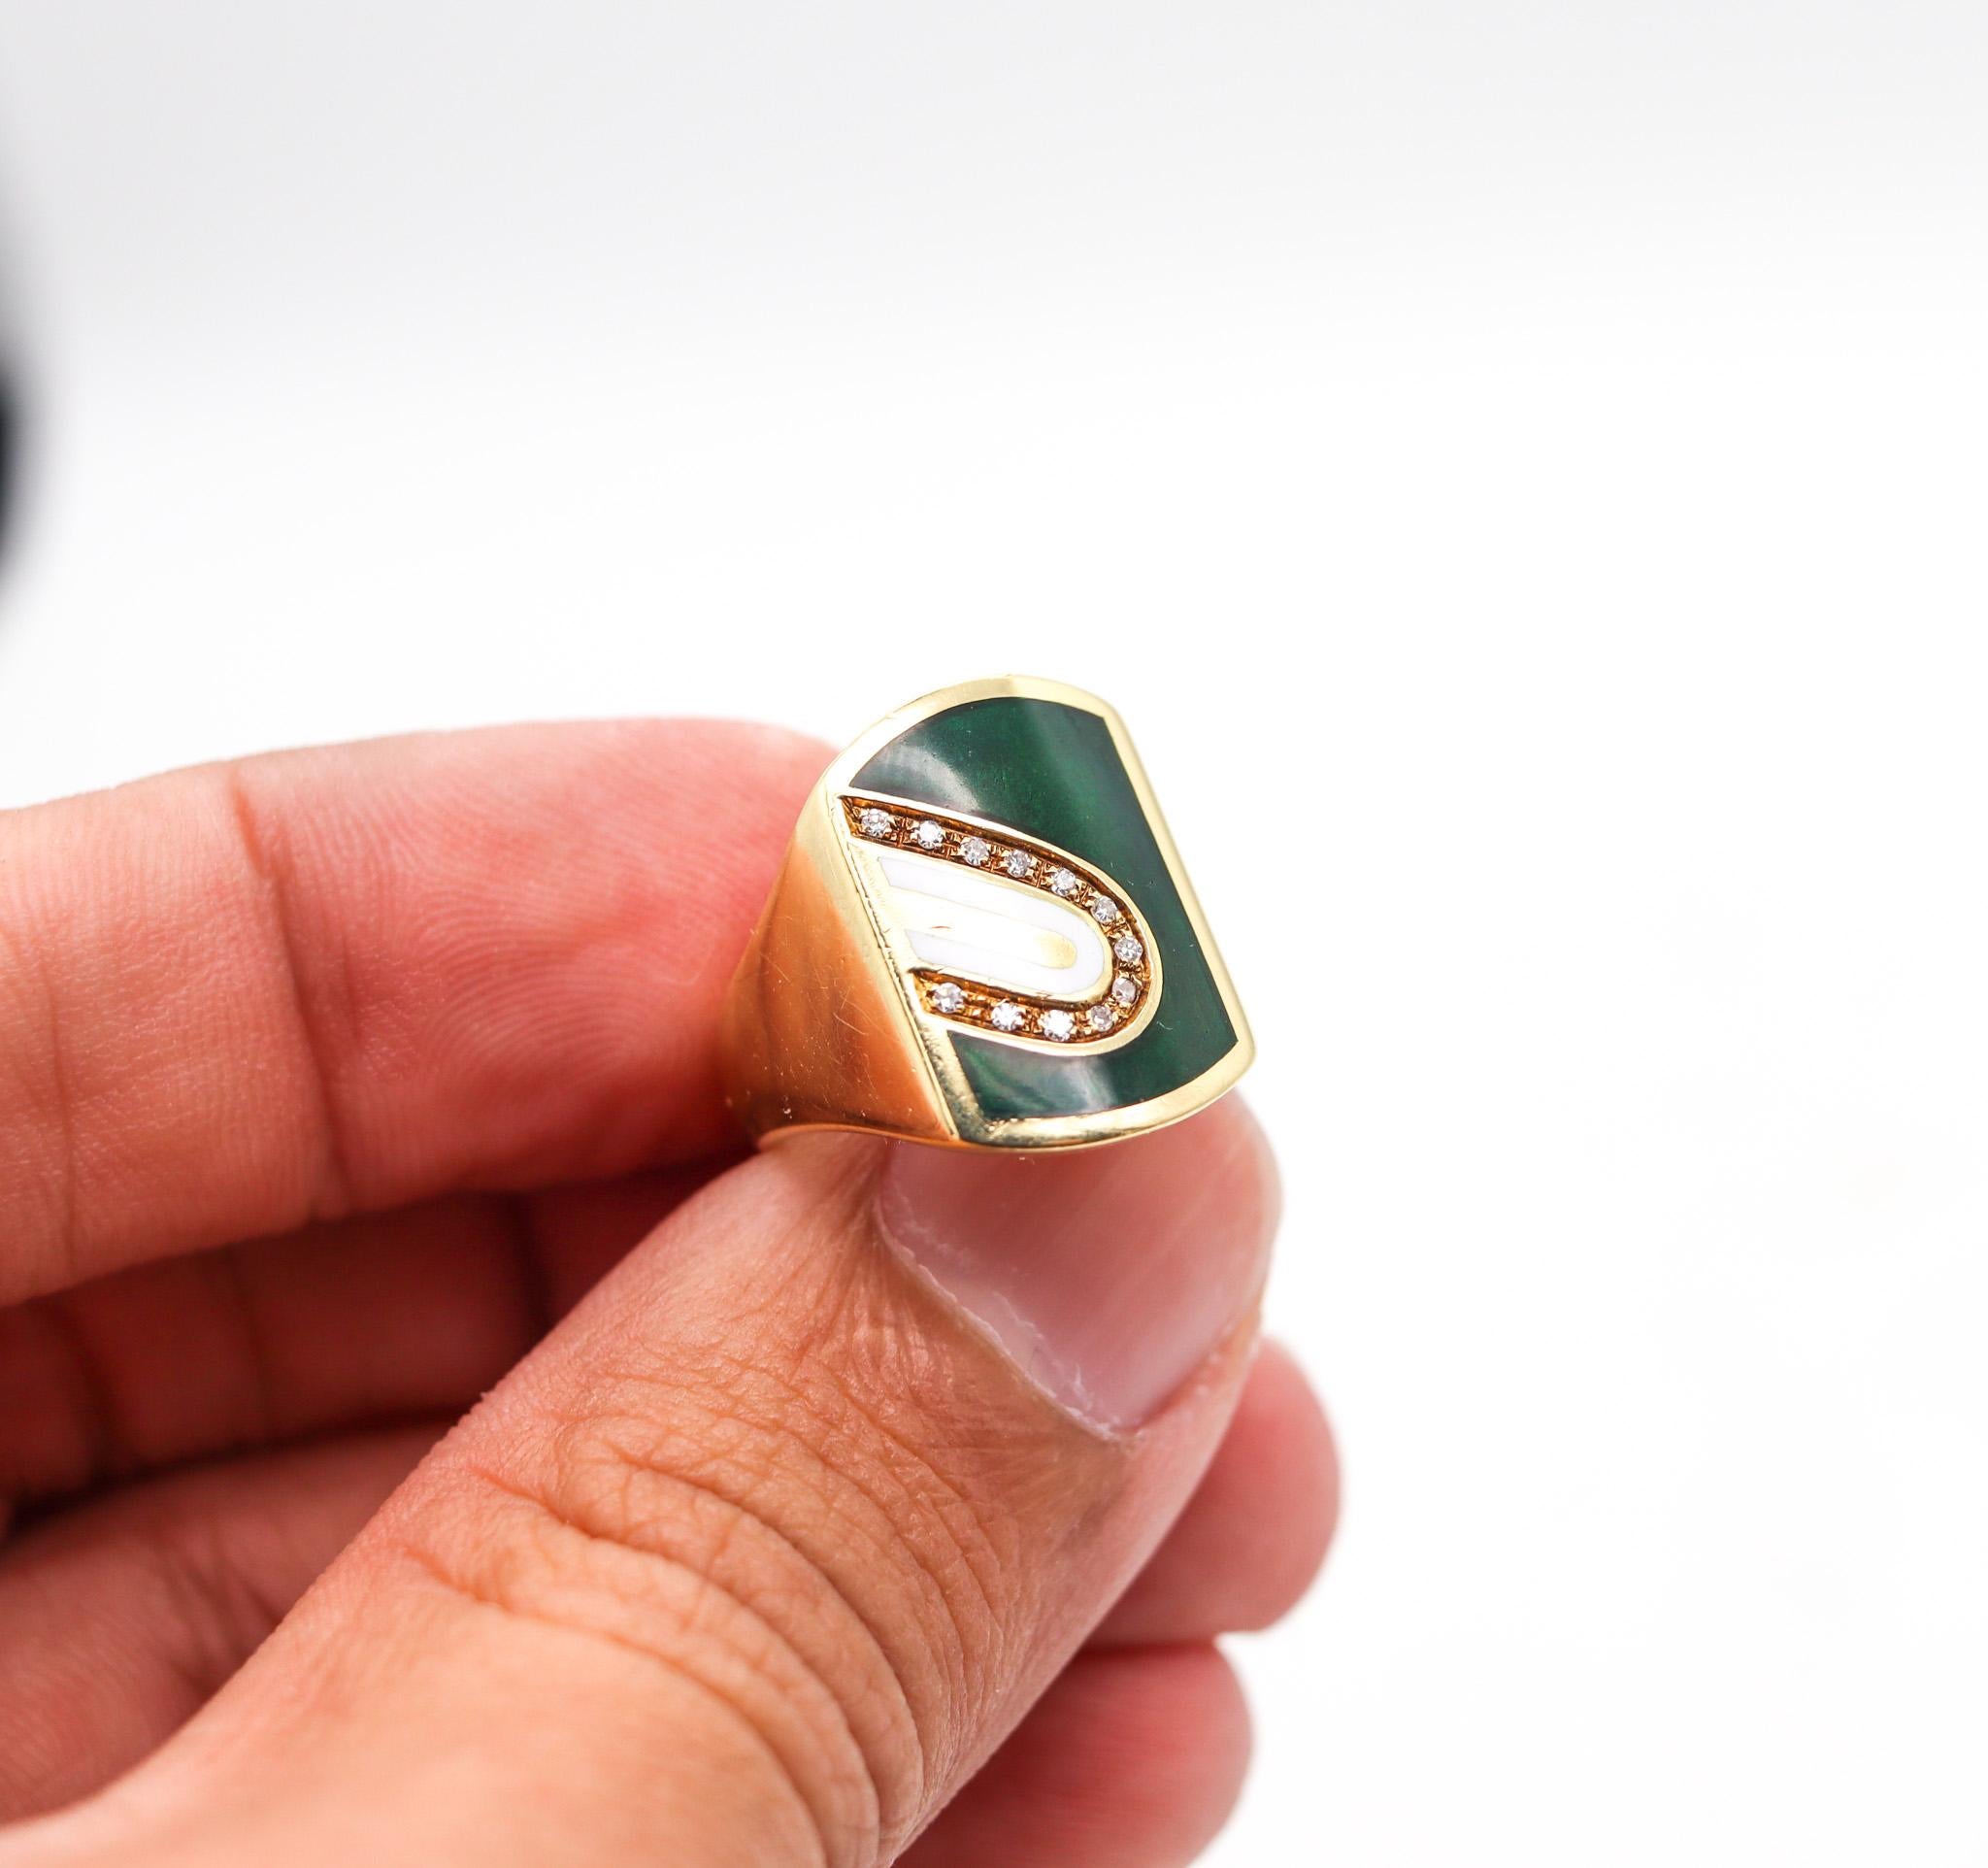 Brilliant Cut Cartier 1970 Modernist Enameled Signet Ring in 18 Karat Gold with Diamonds For Sale